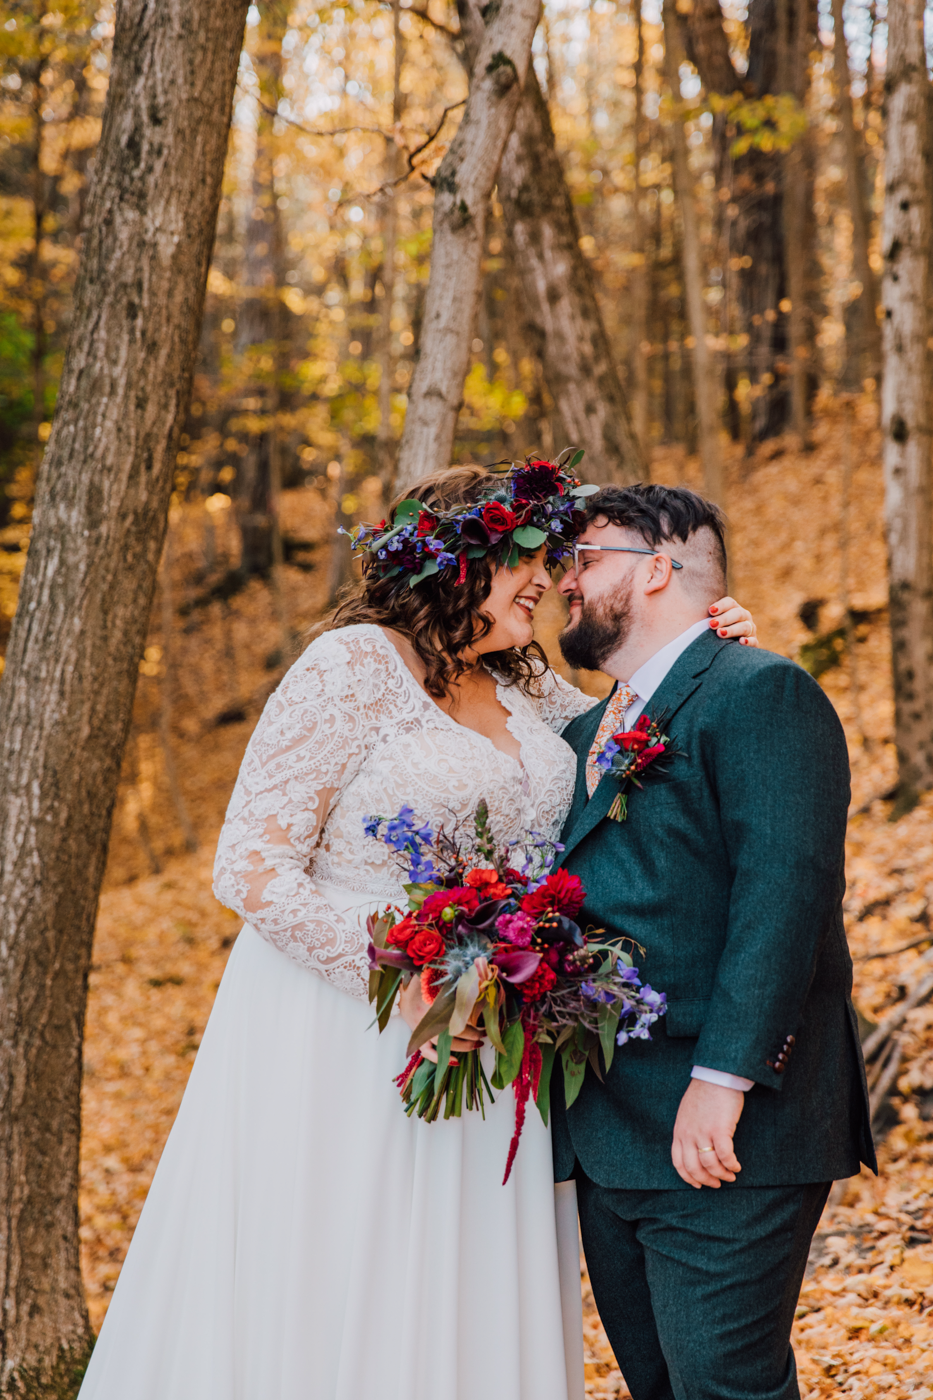  Bride and Groom embrace during forest wedding photos at their fall wedding at New Park Ithaca 